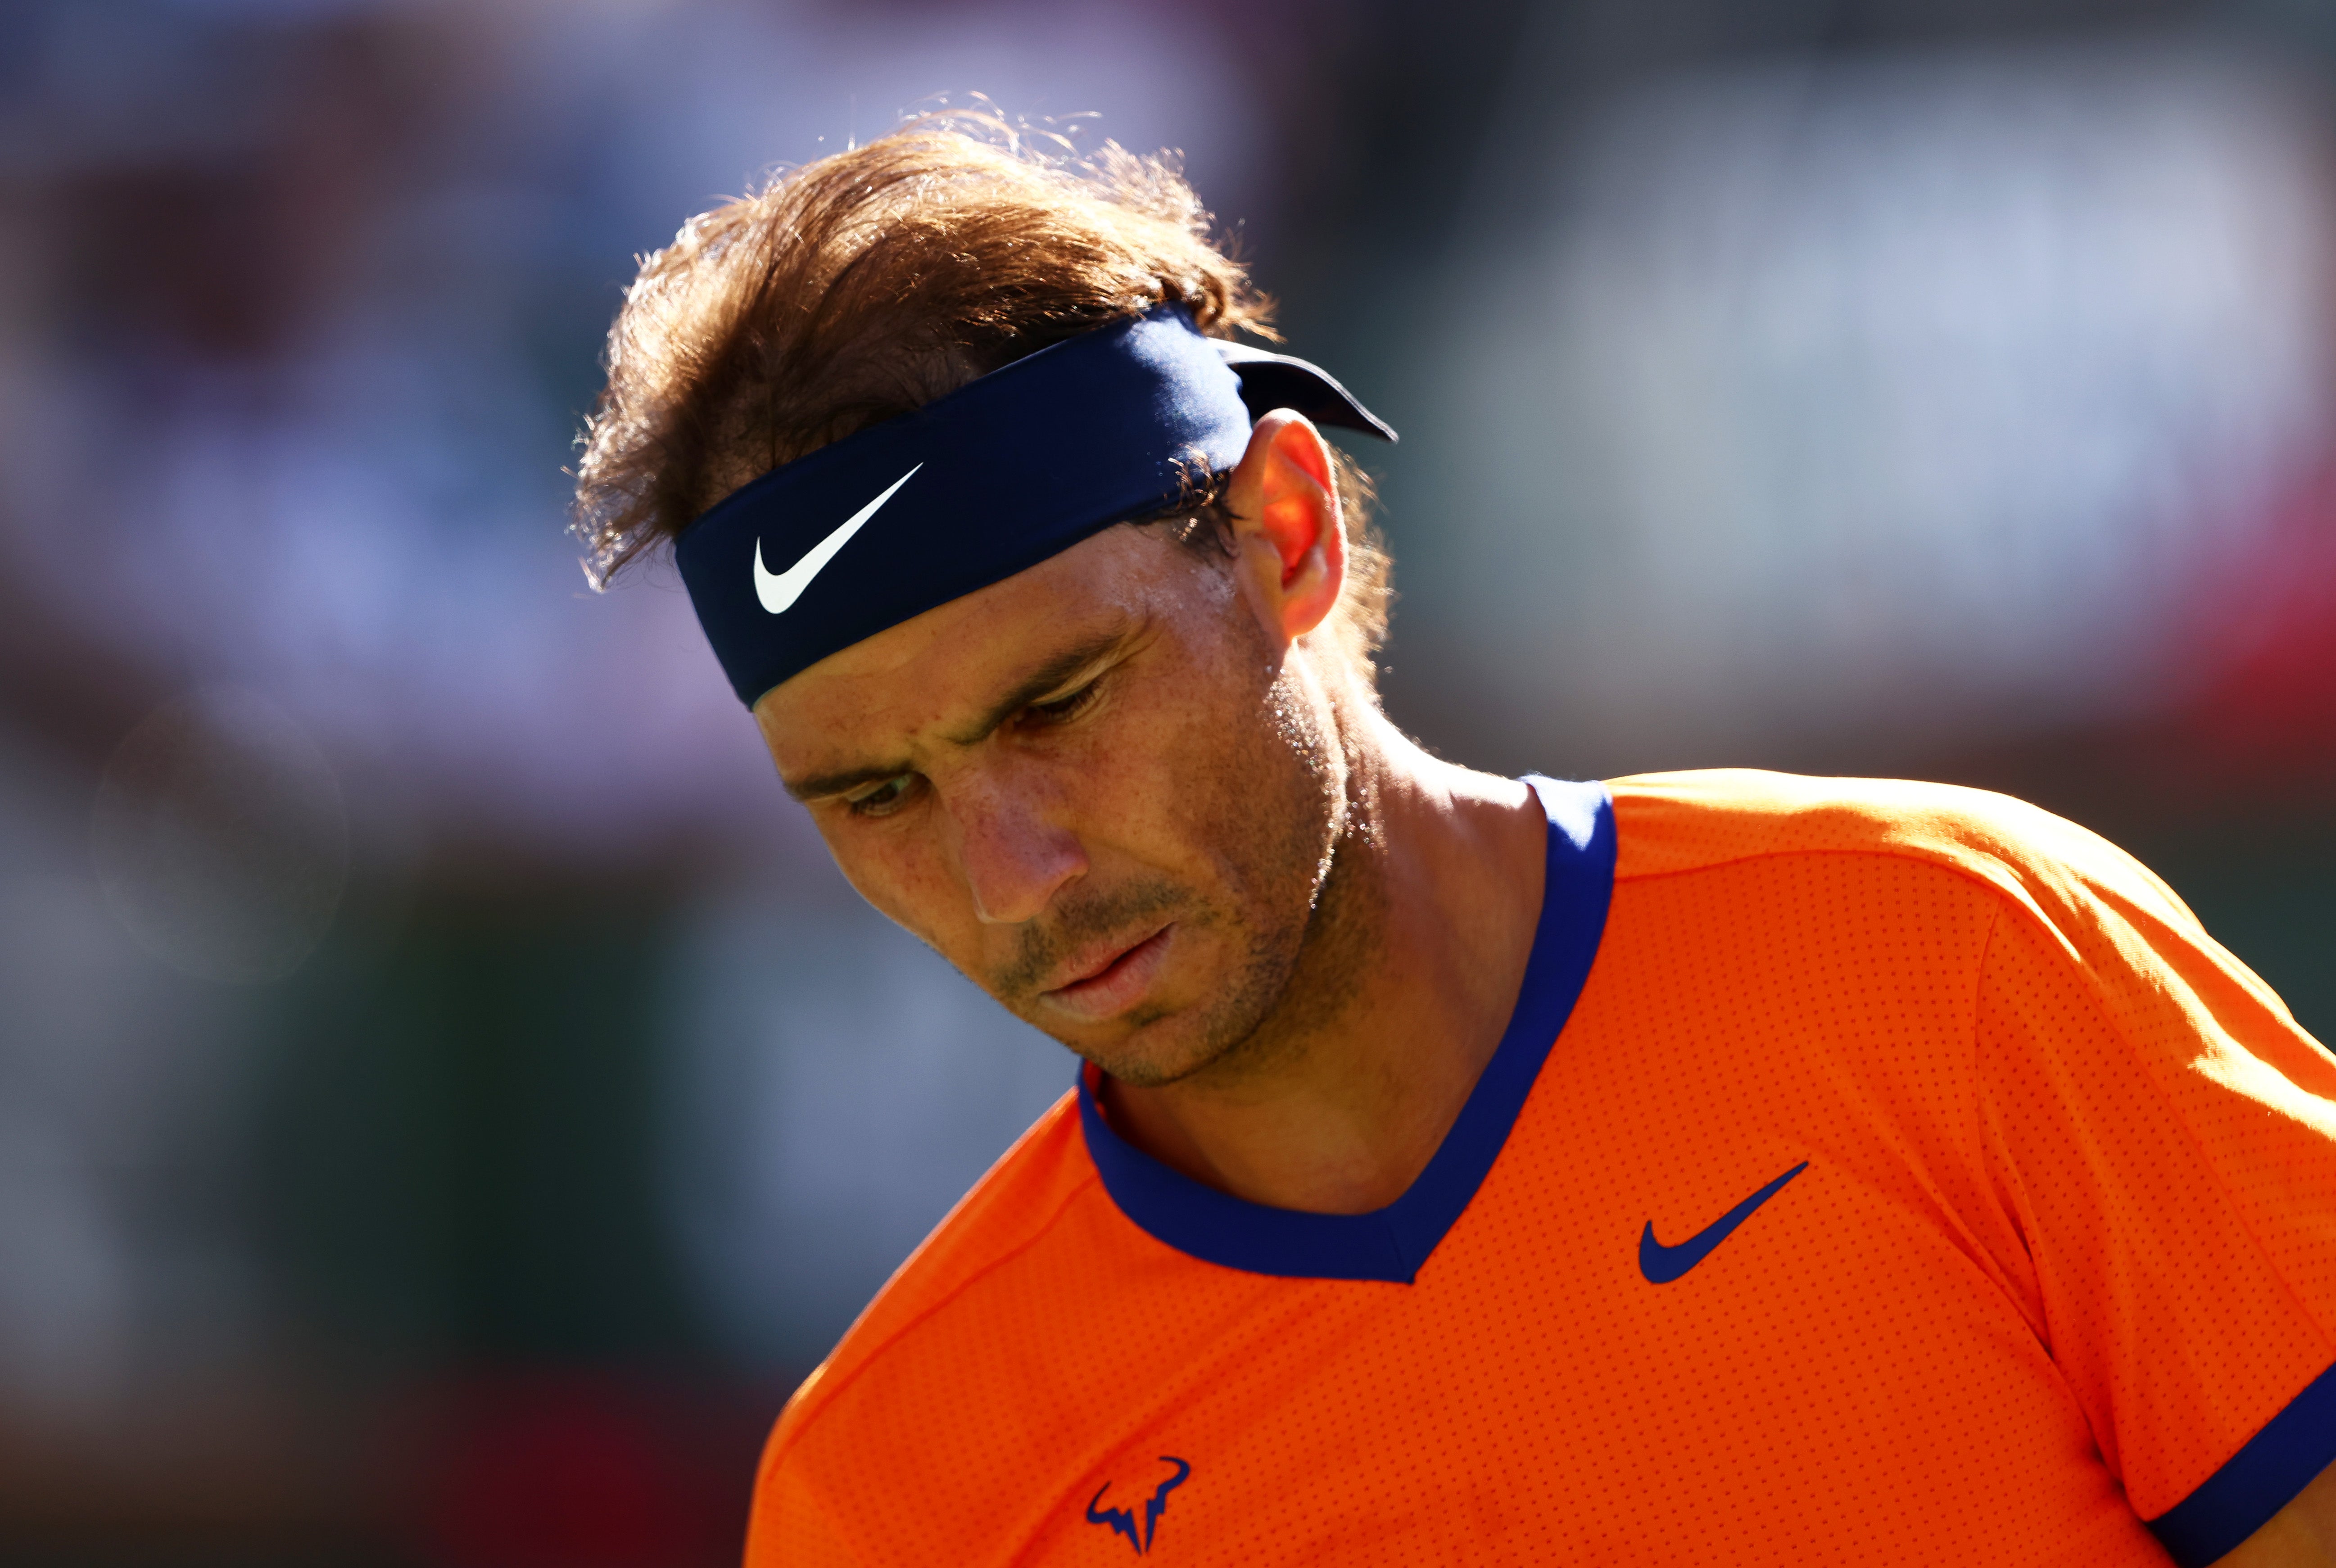 Rafael Nadal struggled with breathing difficulties in the Indian Wells final